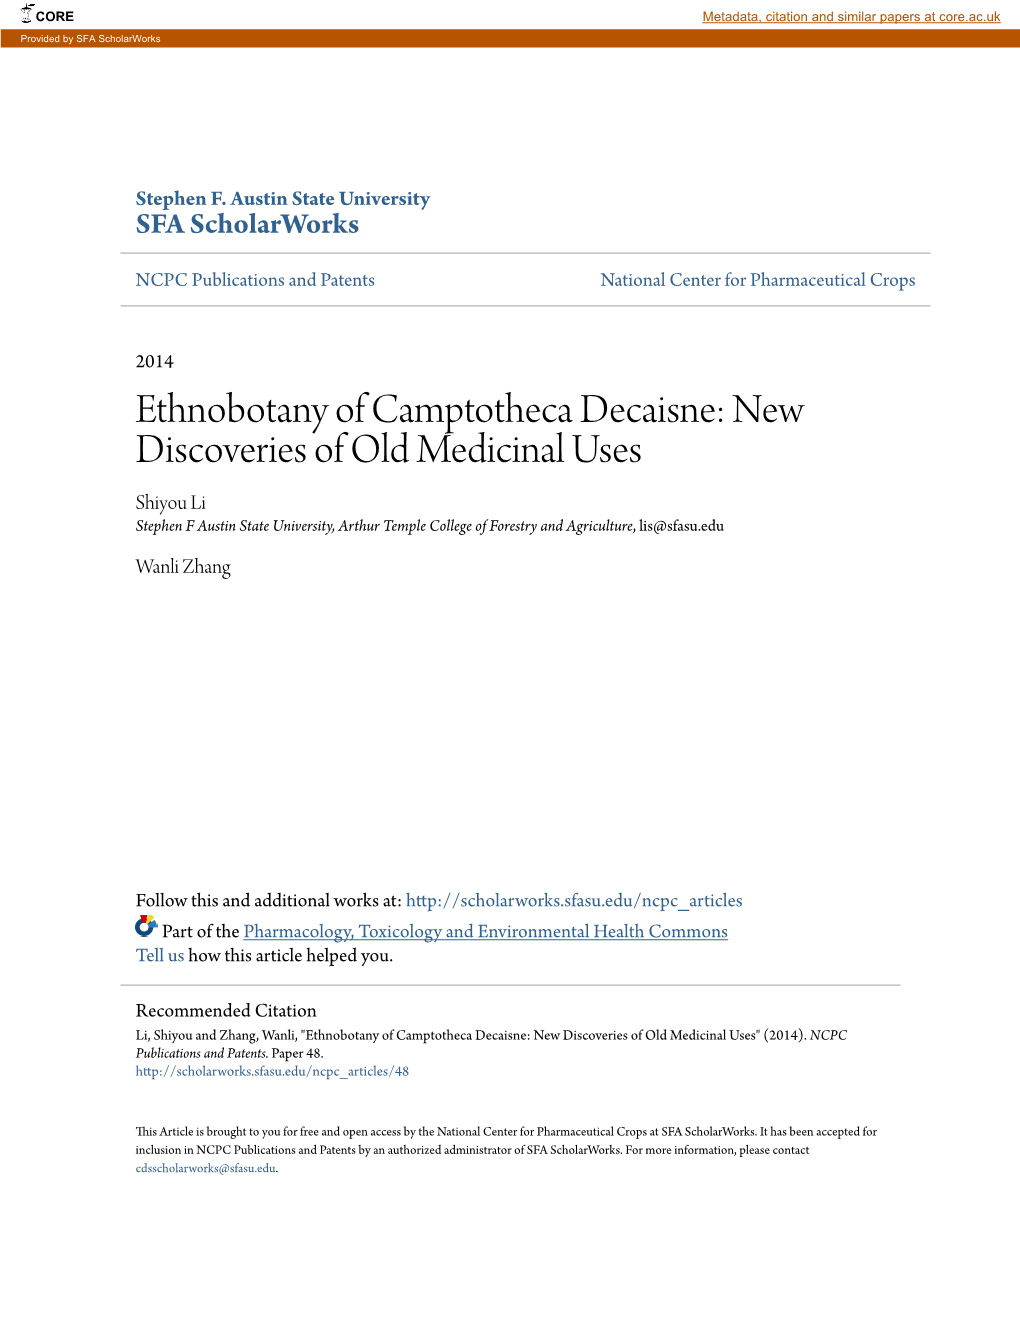 Ethnobotany of Camptotheca Decaisne: New Discoveries of Old Medicinal Uses